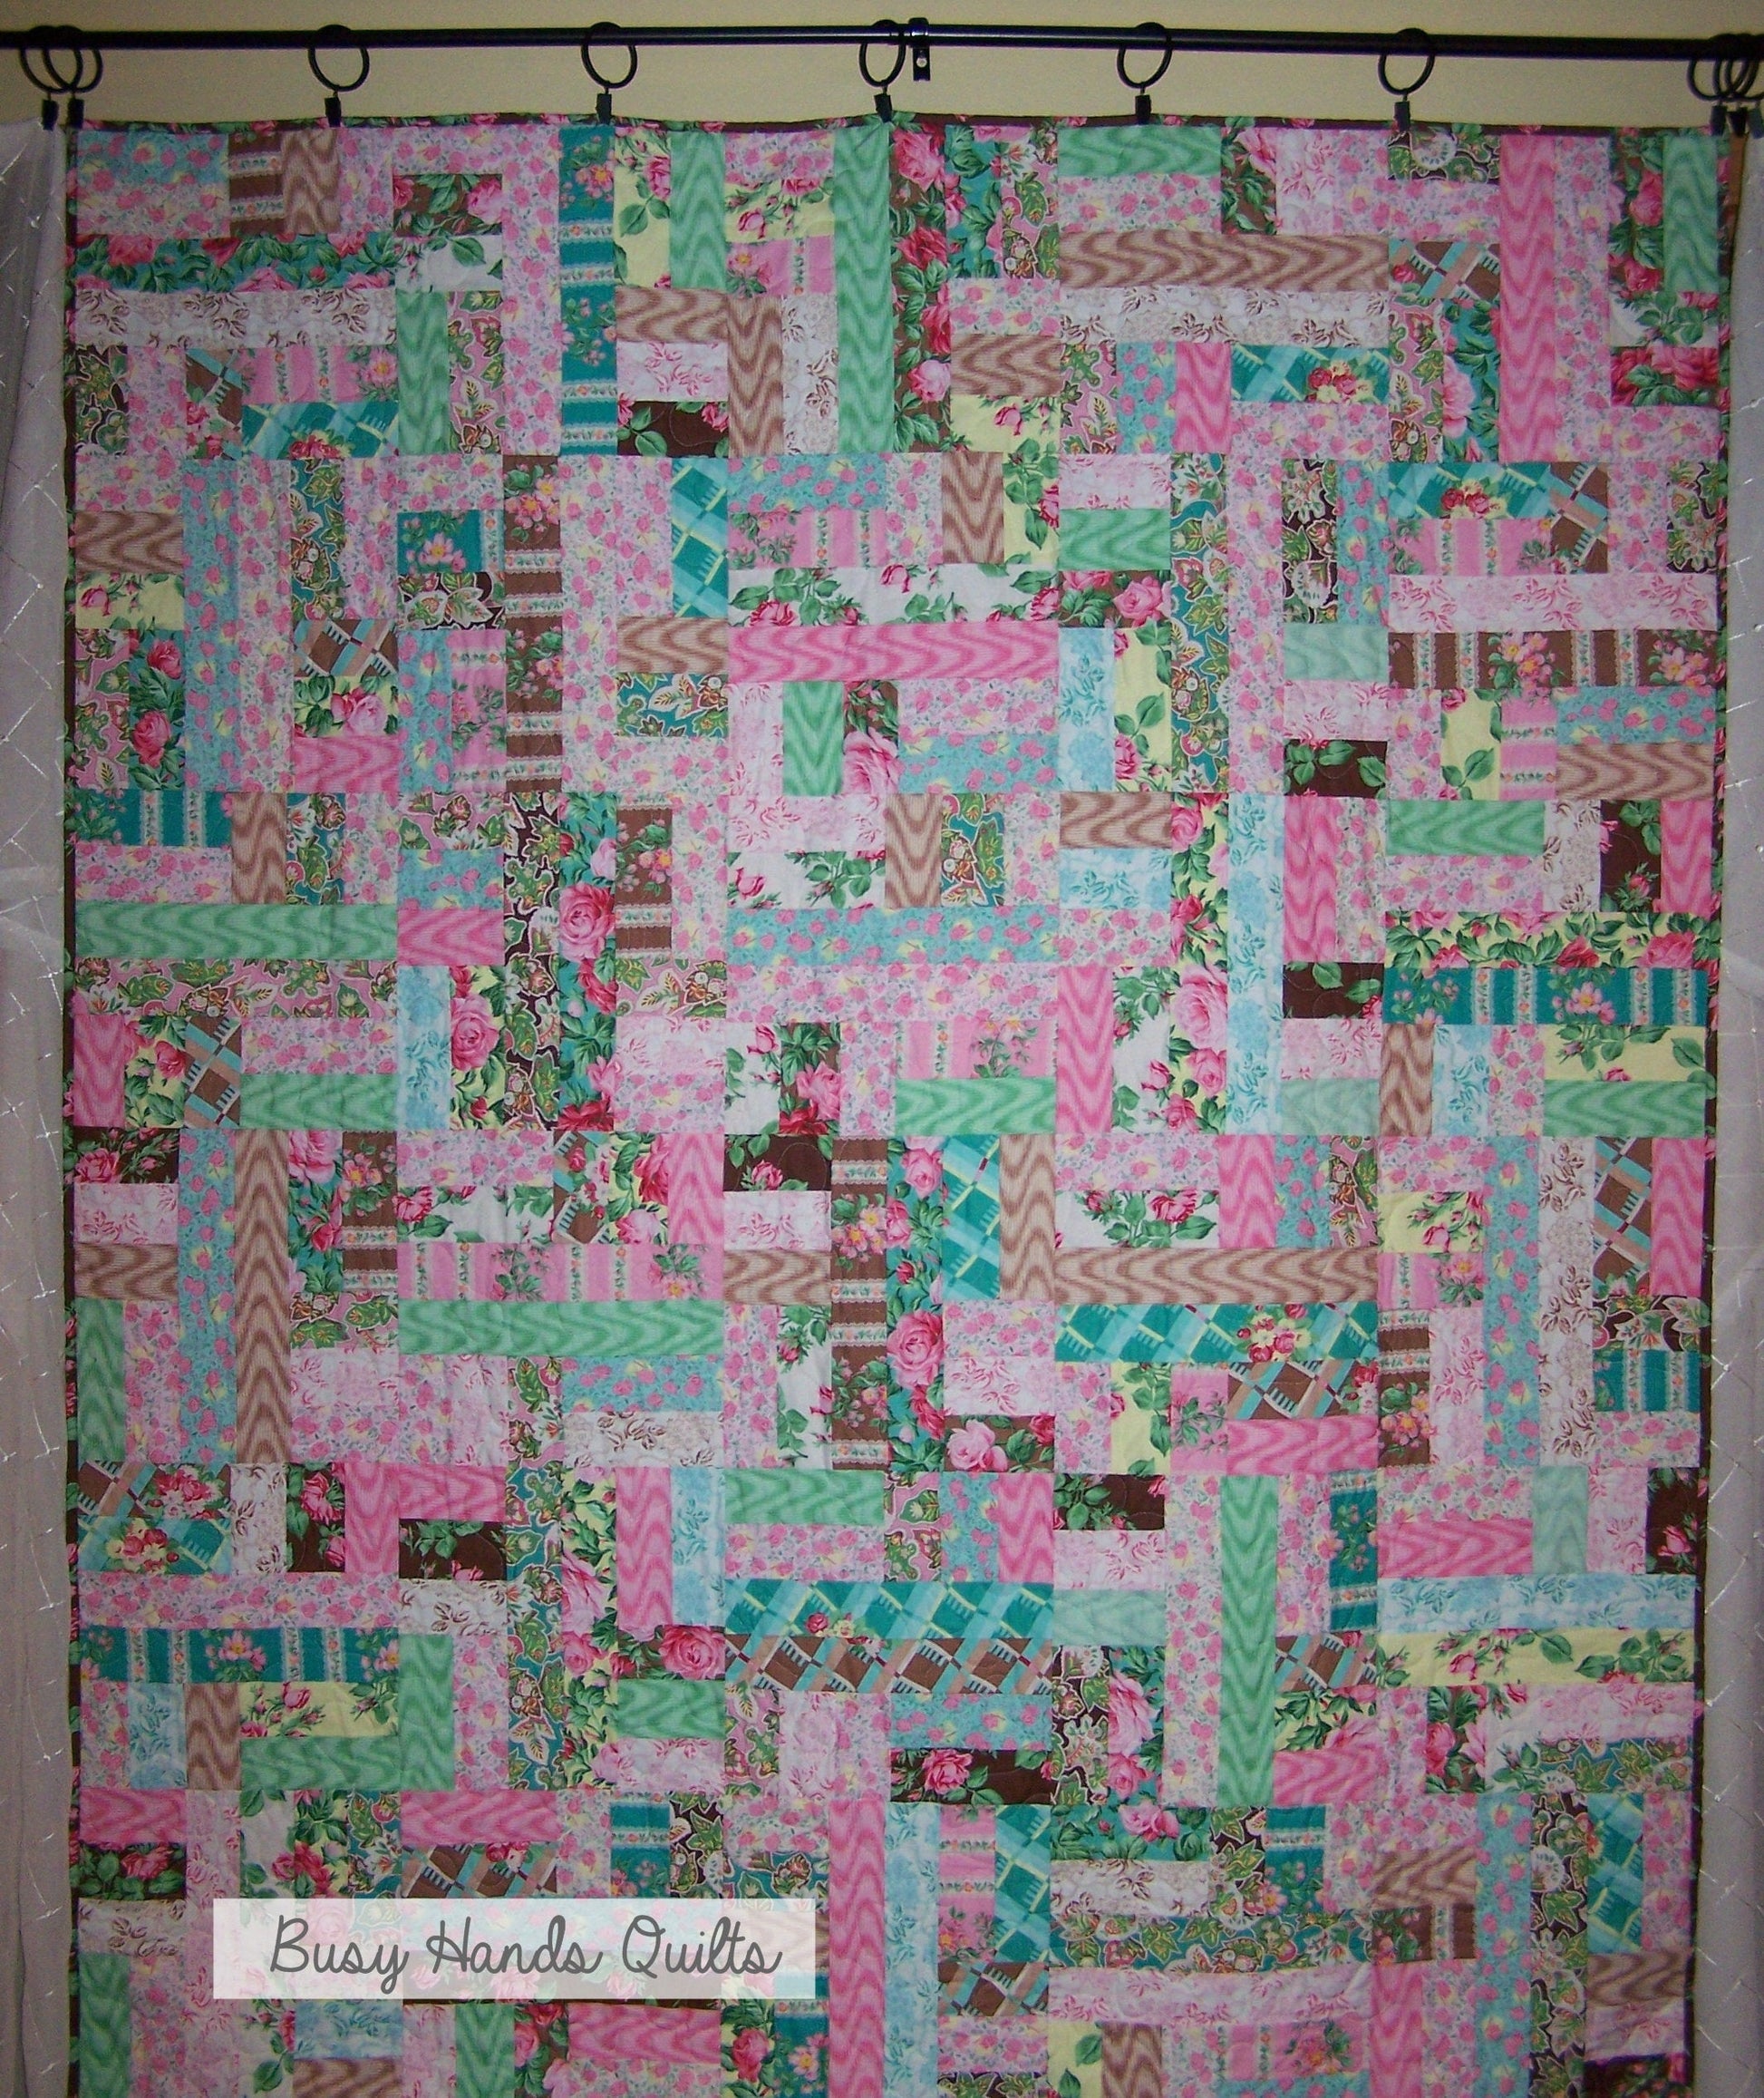 Scrappy Patches Quilt Pattern PDF DOWNLOAD Busy Hands Quilts $12.99